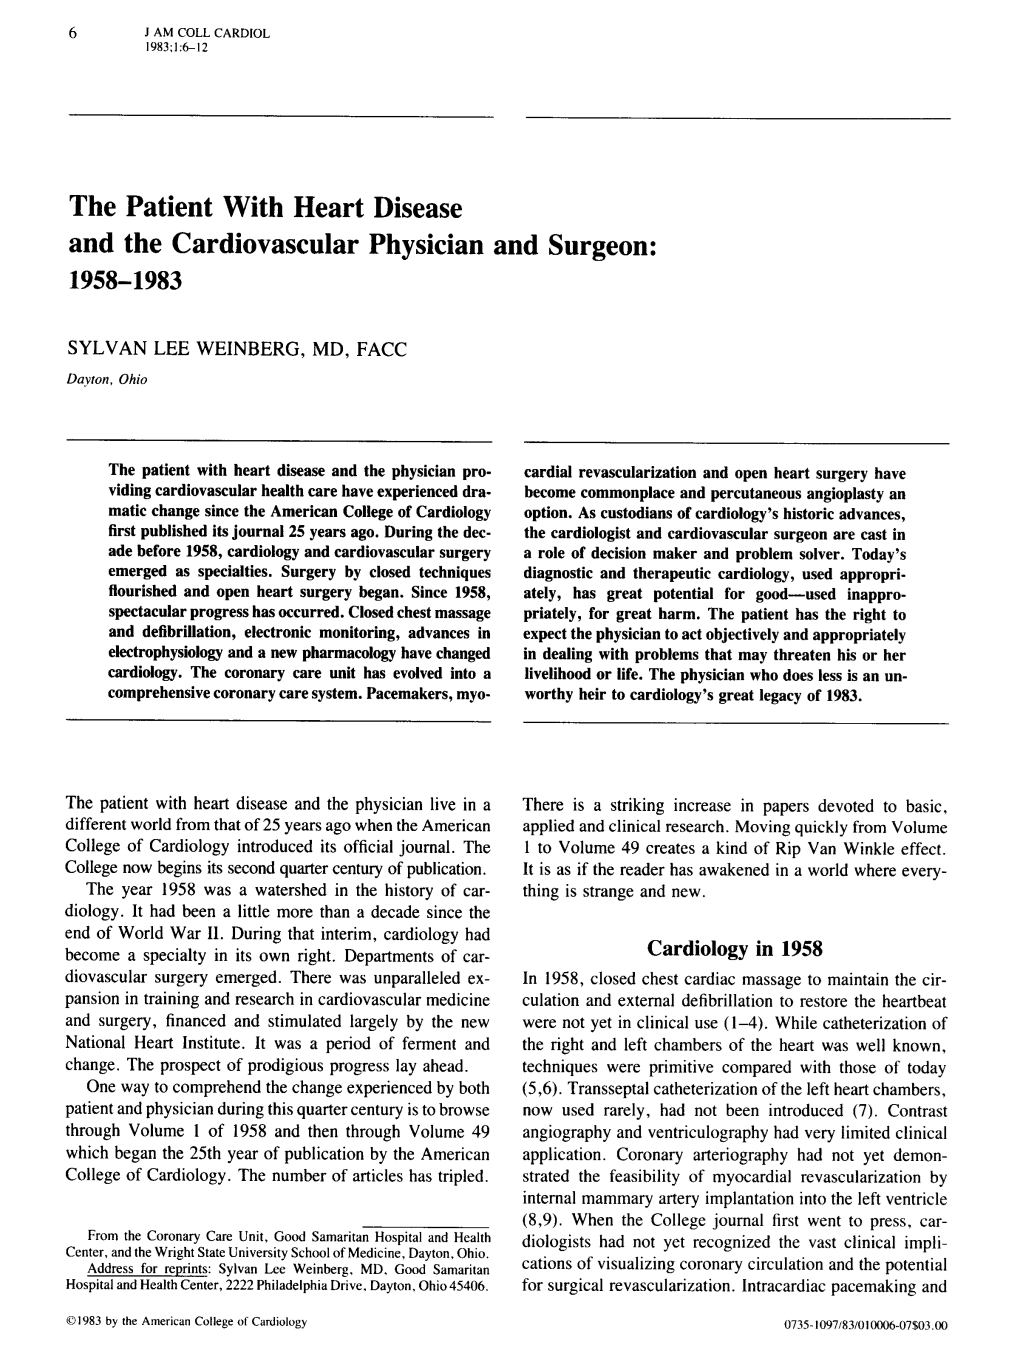 The Patient with Heart Disease and the Cardiovascular Physician and Surgeon: 1958-1983